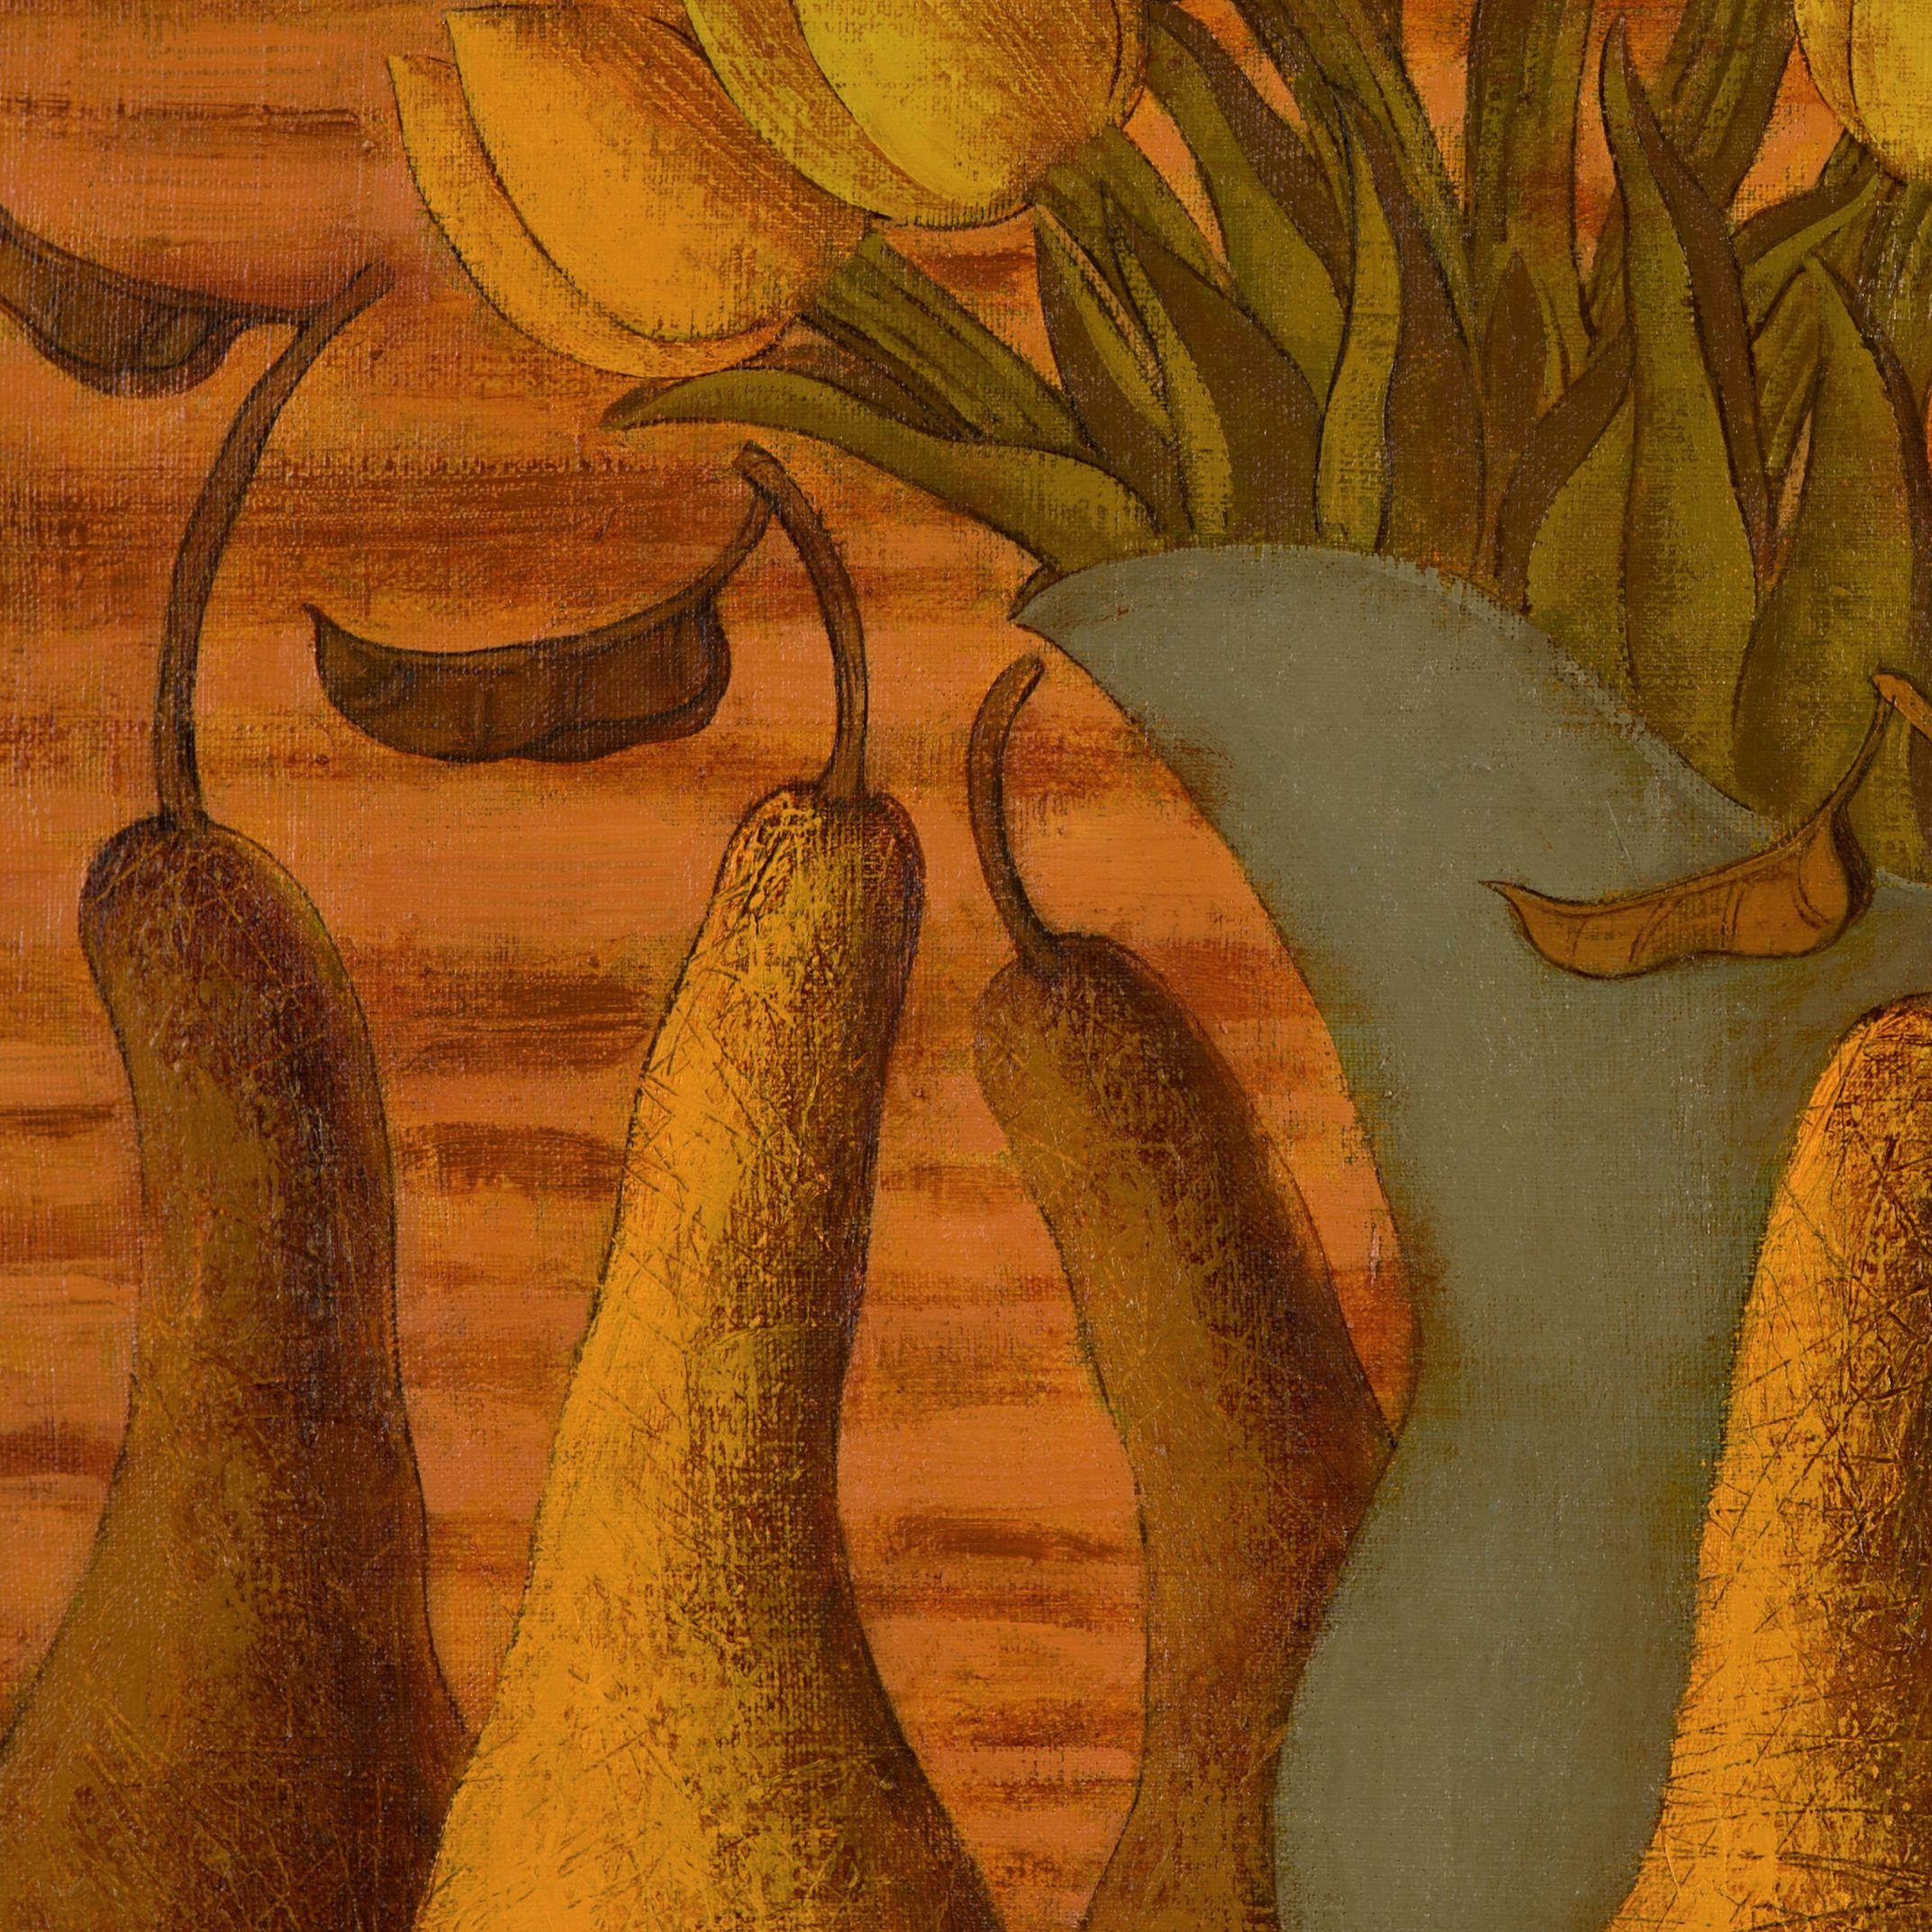 â€¢ Title: Flowers and Pears â€¢ Object type: Painting, oil on canvas â€¢ Year: 2010 â€¢ Dimensions: h 50 cm Ã— w 55 cm â€¢ The work is signed by the artist and comes with a certificate of authenticity. :: Painting :: Art Deco/Art Nouveau :: This